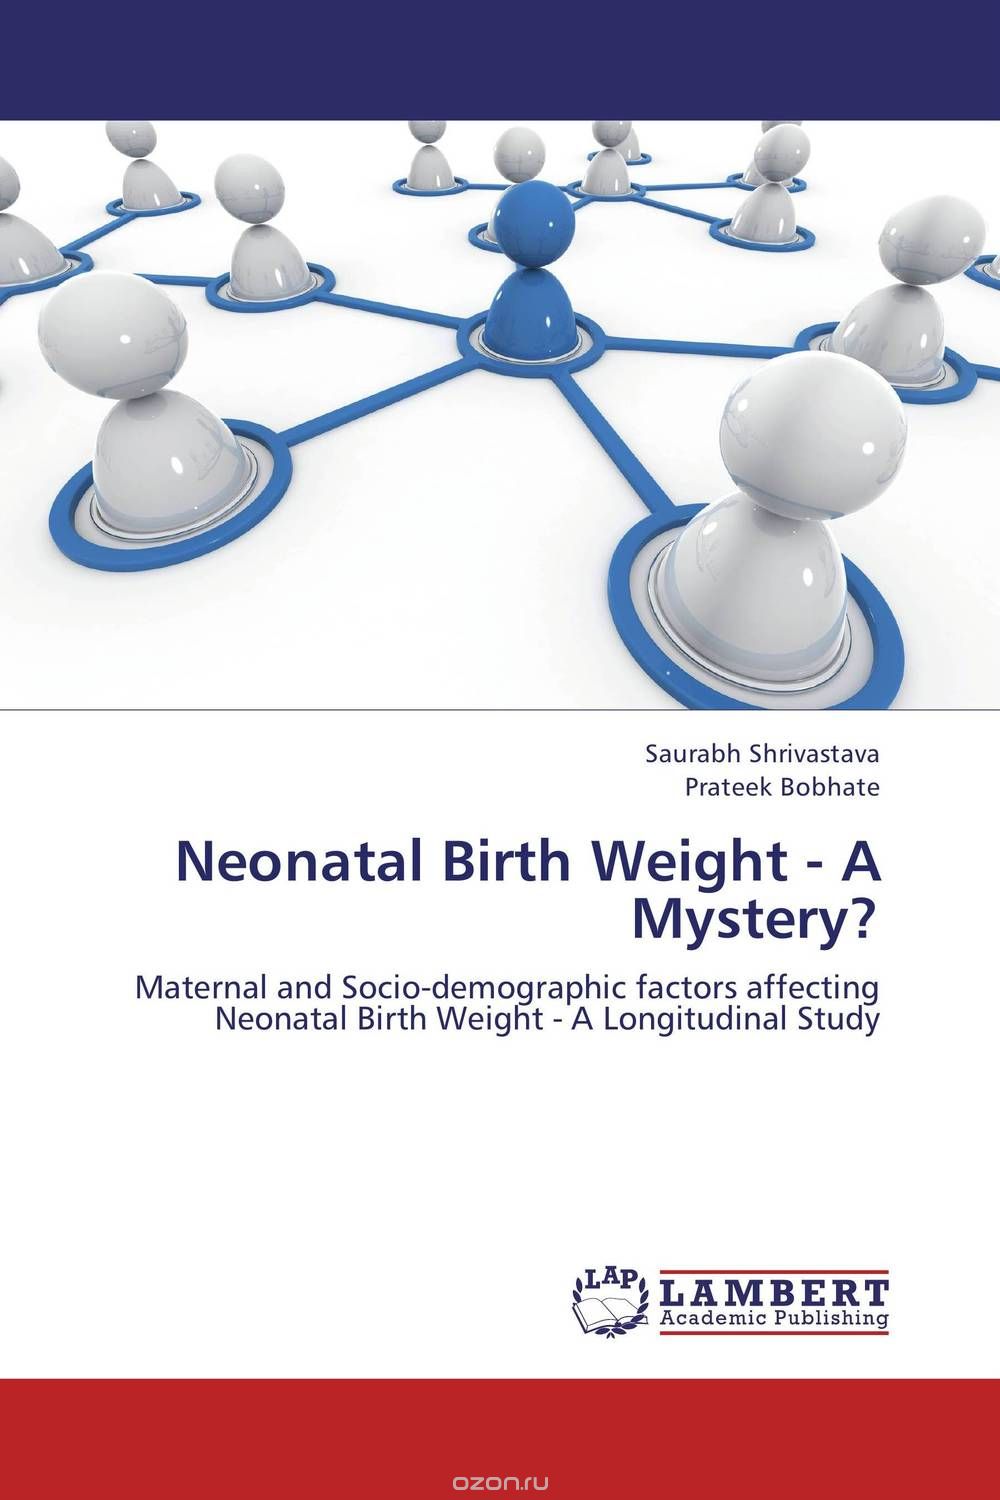 Neonatal Birth Weight - A Mystery?